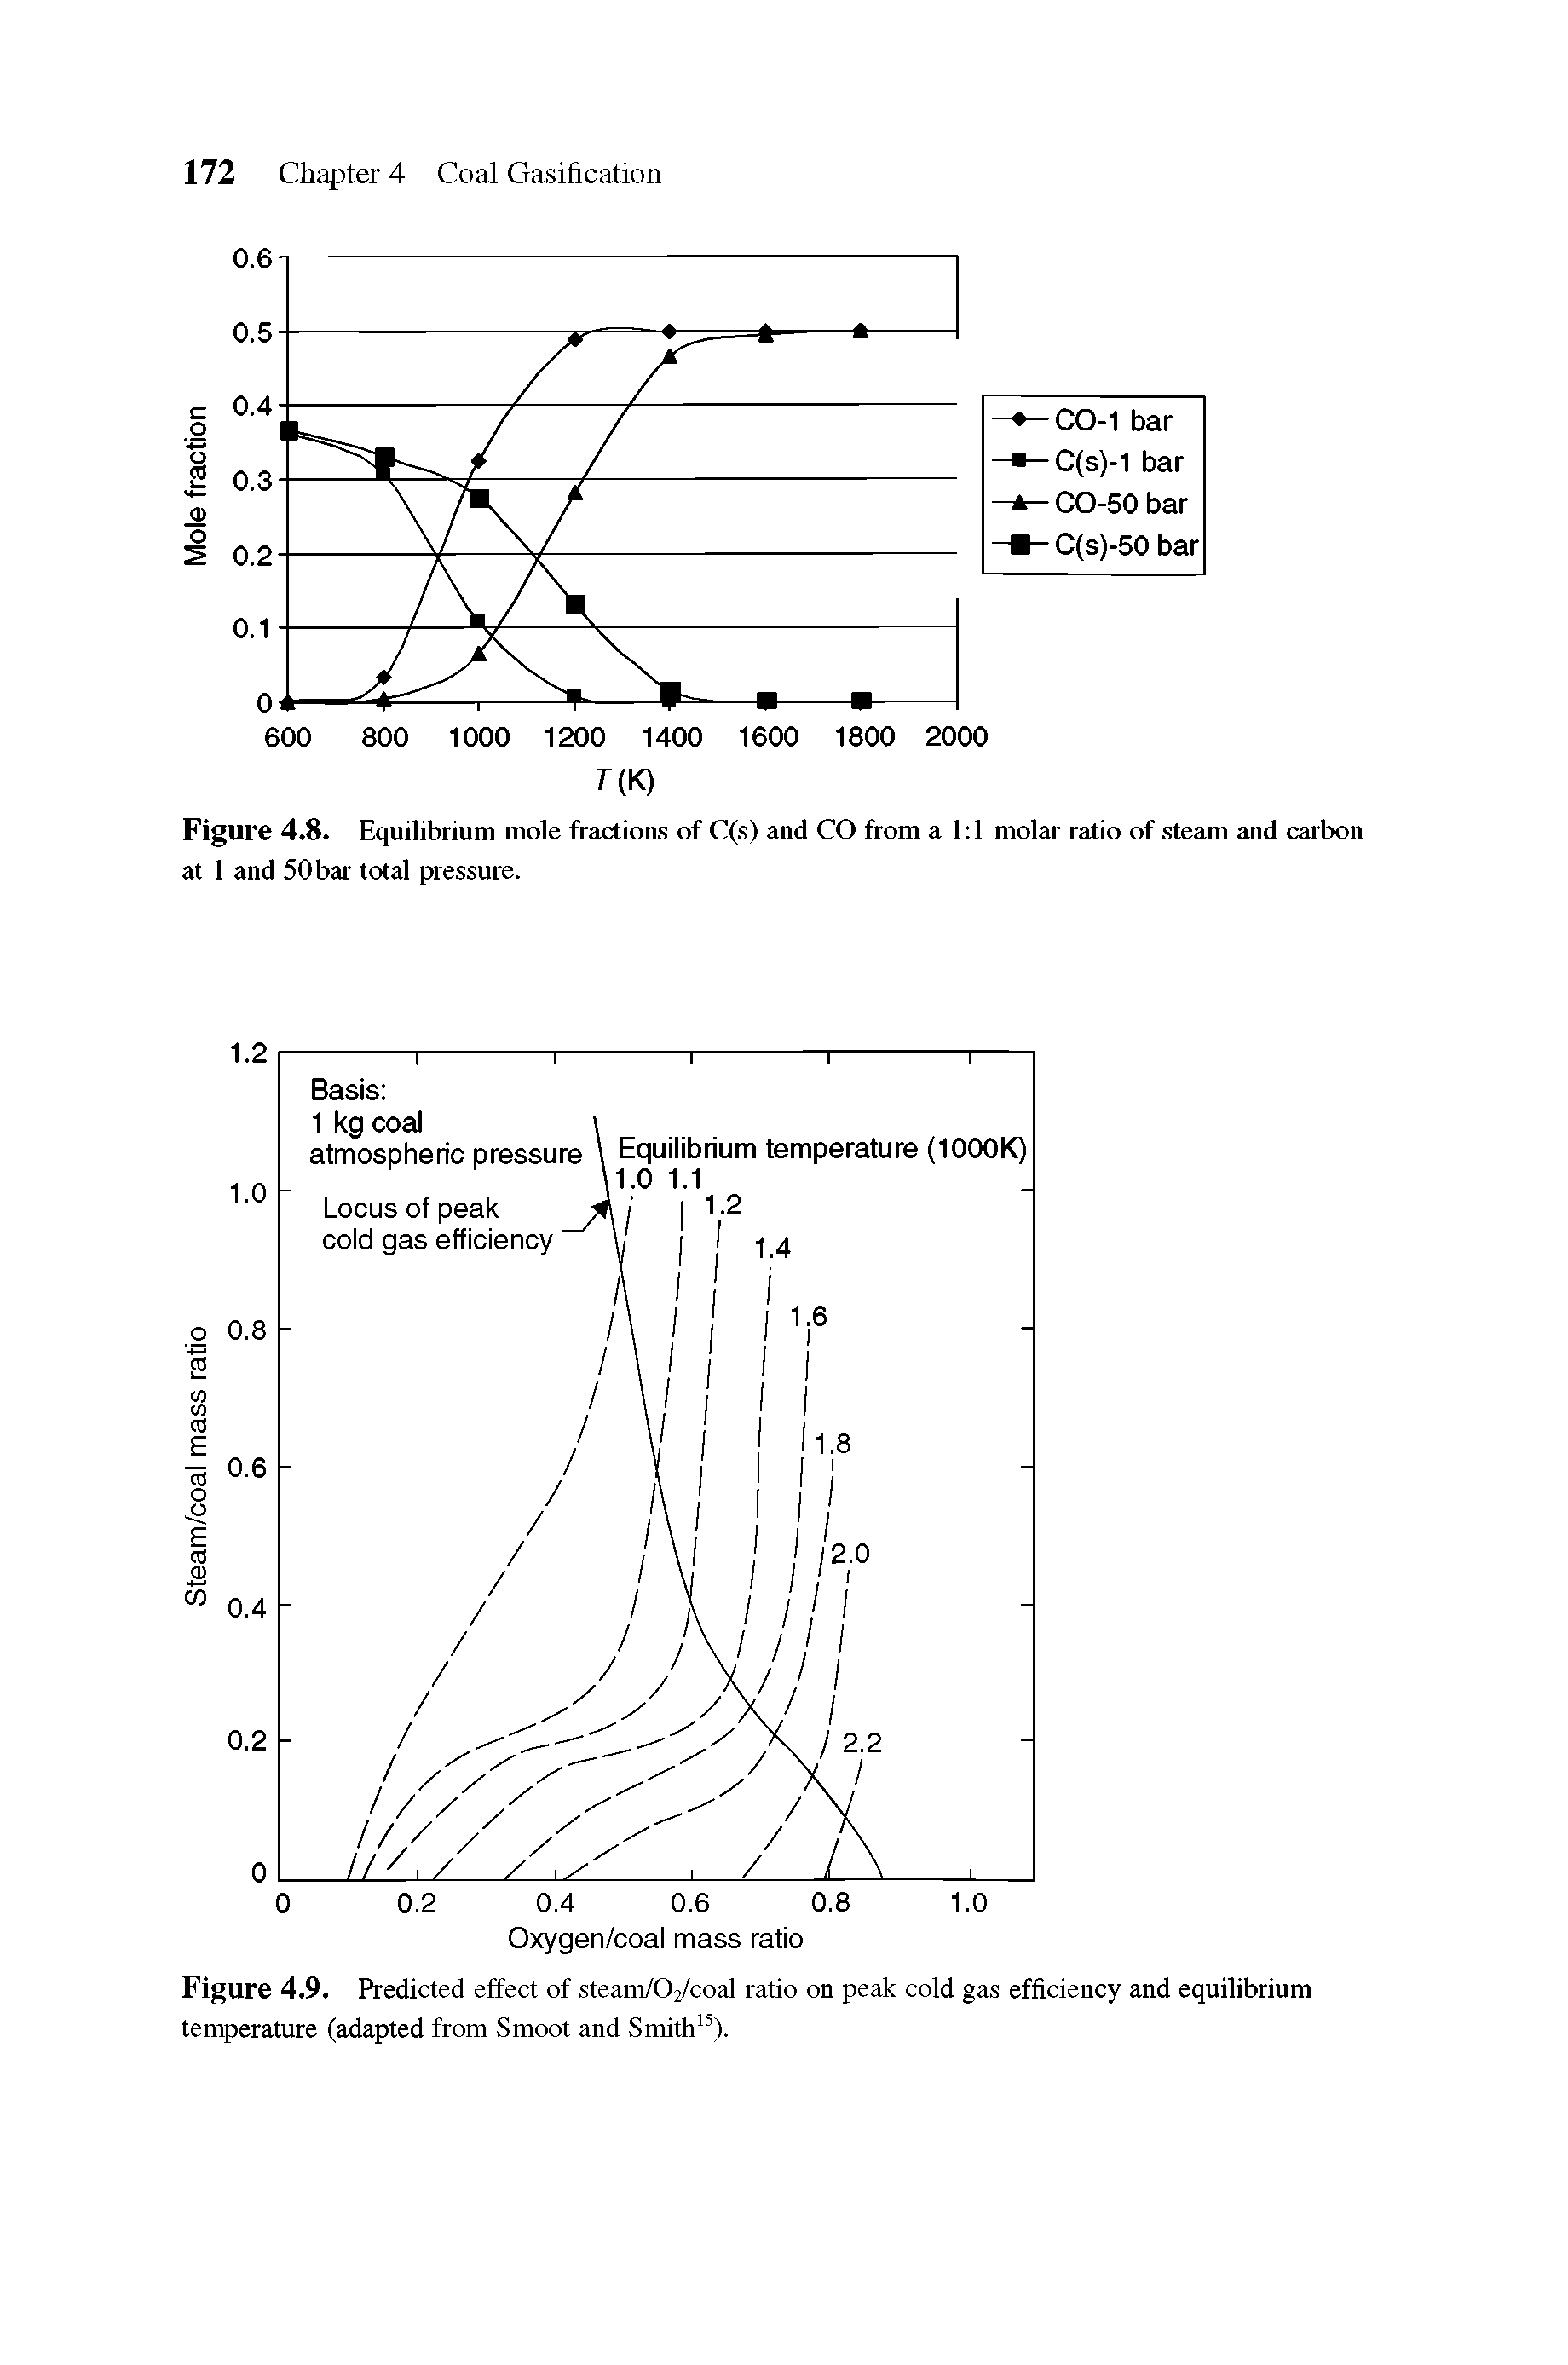 Figure 4.9. Predicted effect of steam/02/coal ratio on peak cold gas efficiency and equilibrium temperature (adapted from Smoot and Smith15).